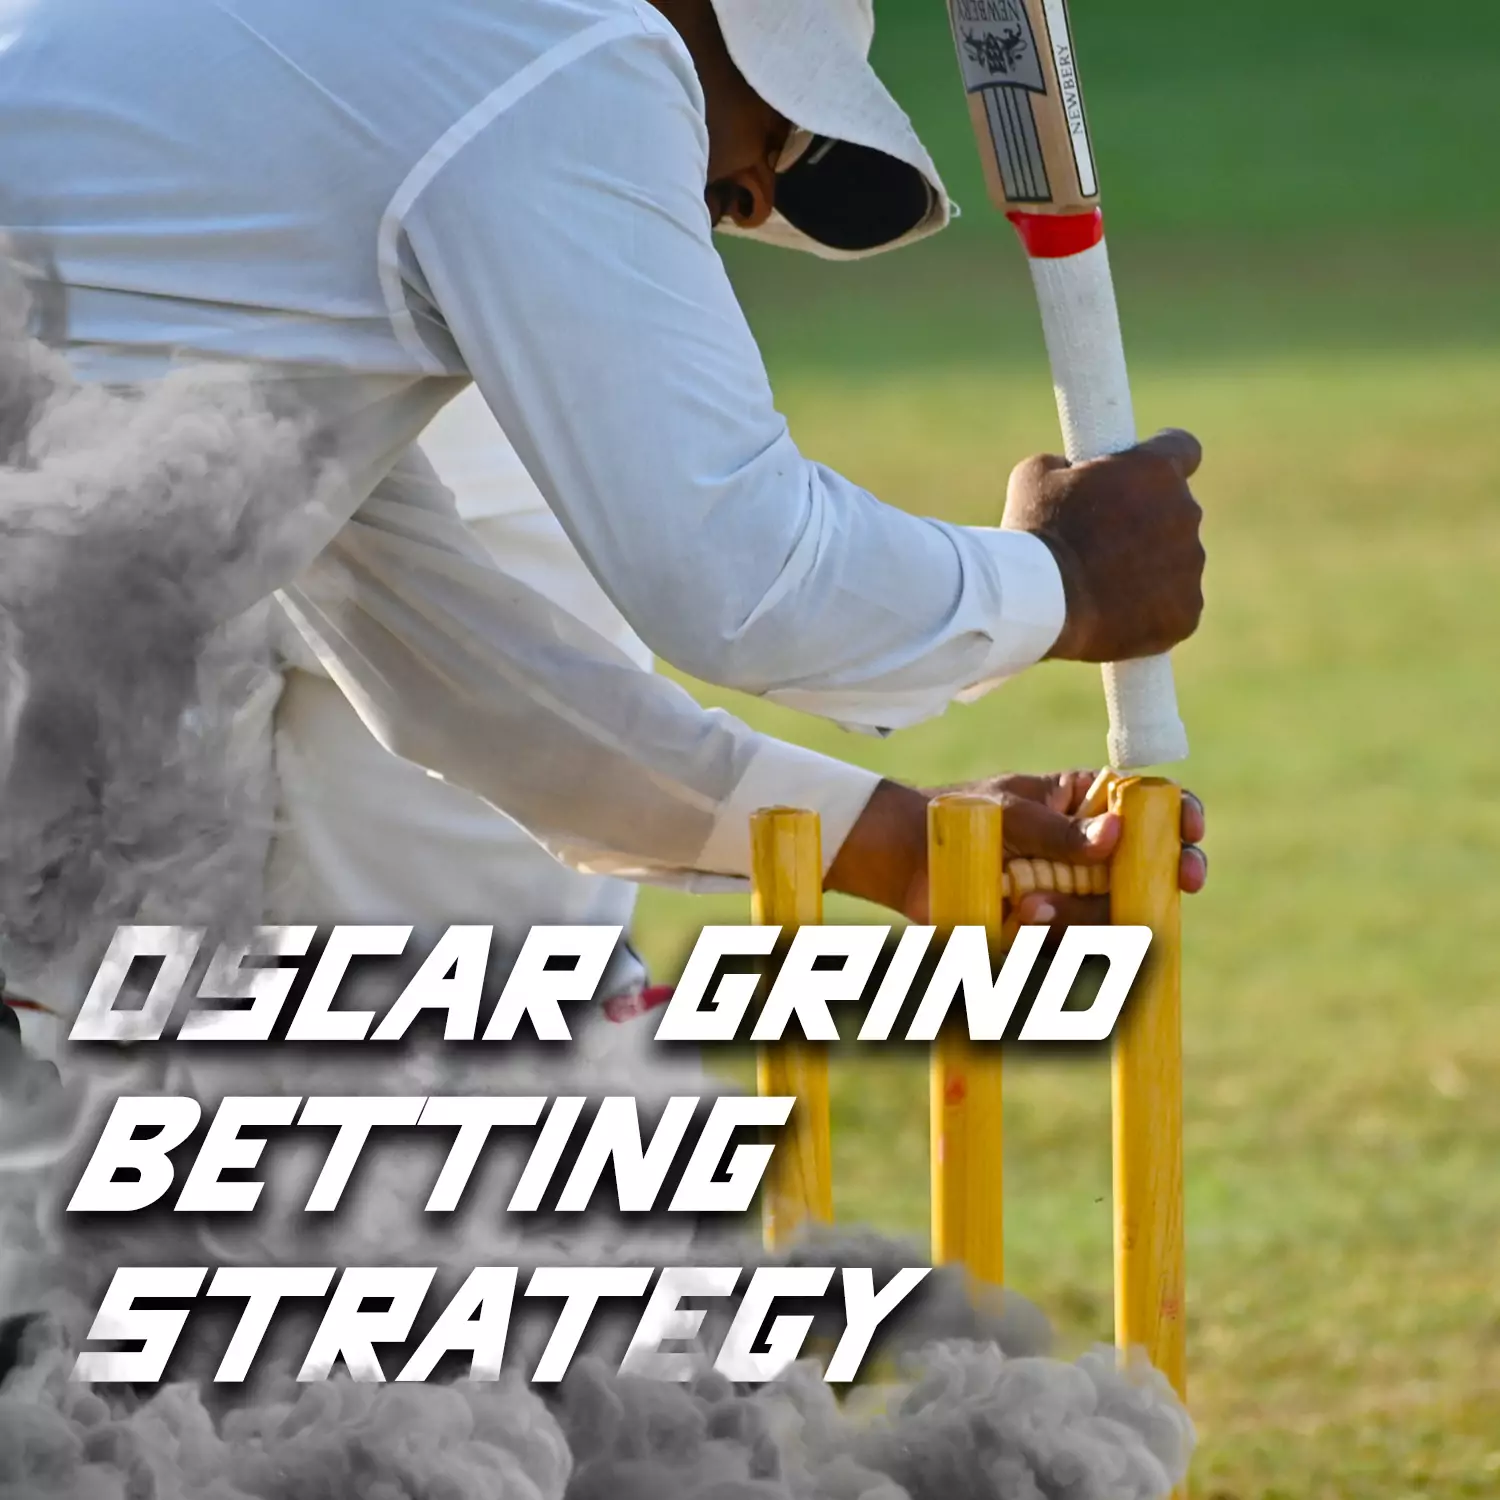 Oscar's Grind cricket betting system is a slow and thorough way to make money betting on your favorite cricket team.